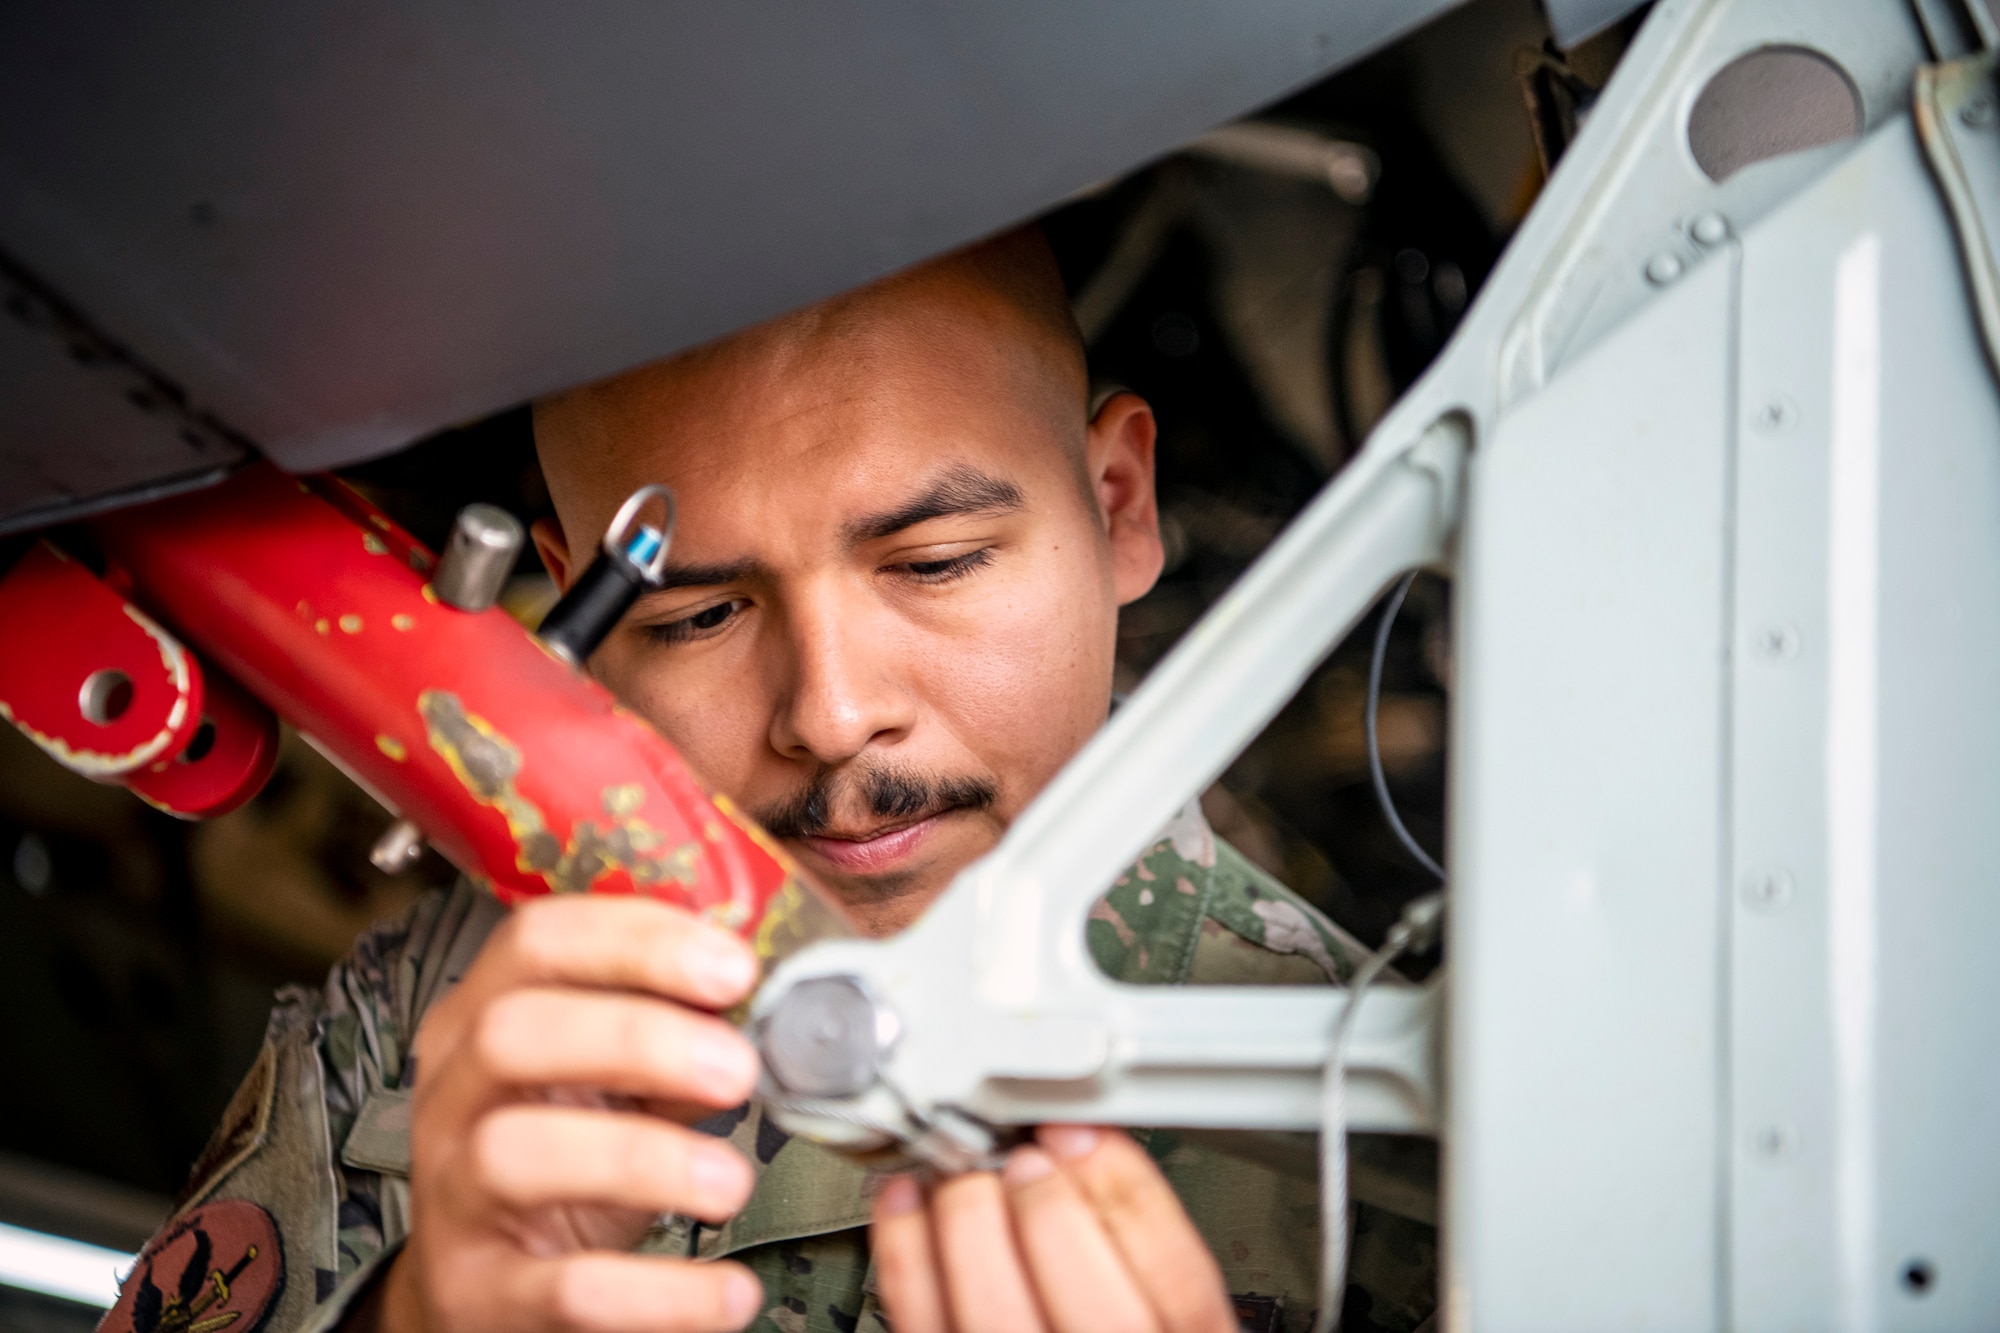 U.S. Air Force Senior Airman Erik Jimenez, 23rd Aircraft Maintenance unit apprentice, adjusts a component on a B-52 Stratofortress aircraft assigned to the 23rd Expeditionary Bomb Squadron, prior to departure at RAF Fairford, United Kingdom, Sept. 21, 2022. Jimenez was part of a Bomber Task Force focused on deterring adversaries, assuring allies and partners, strengthening interoperability, and maintaining and demonstrating readiness and lethality across Europe. (U.S. Air Force photo by Staff Sgt. Eugene Oliver)